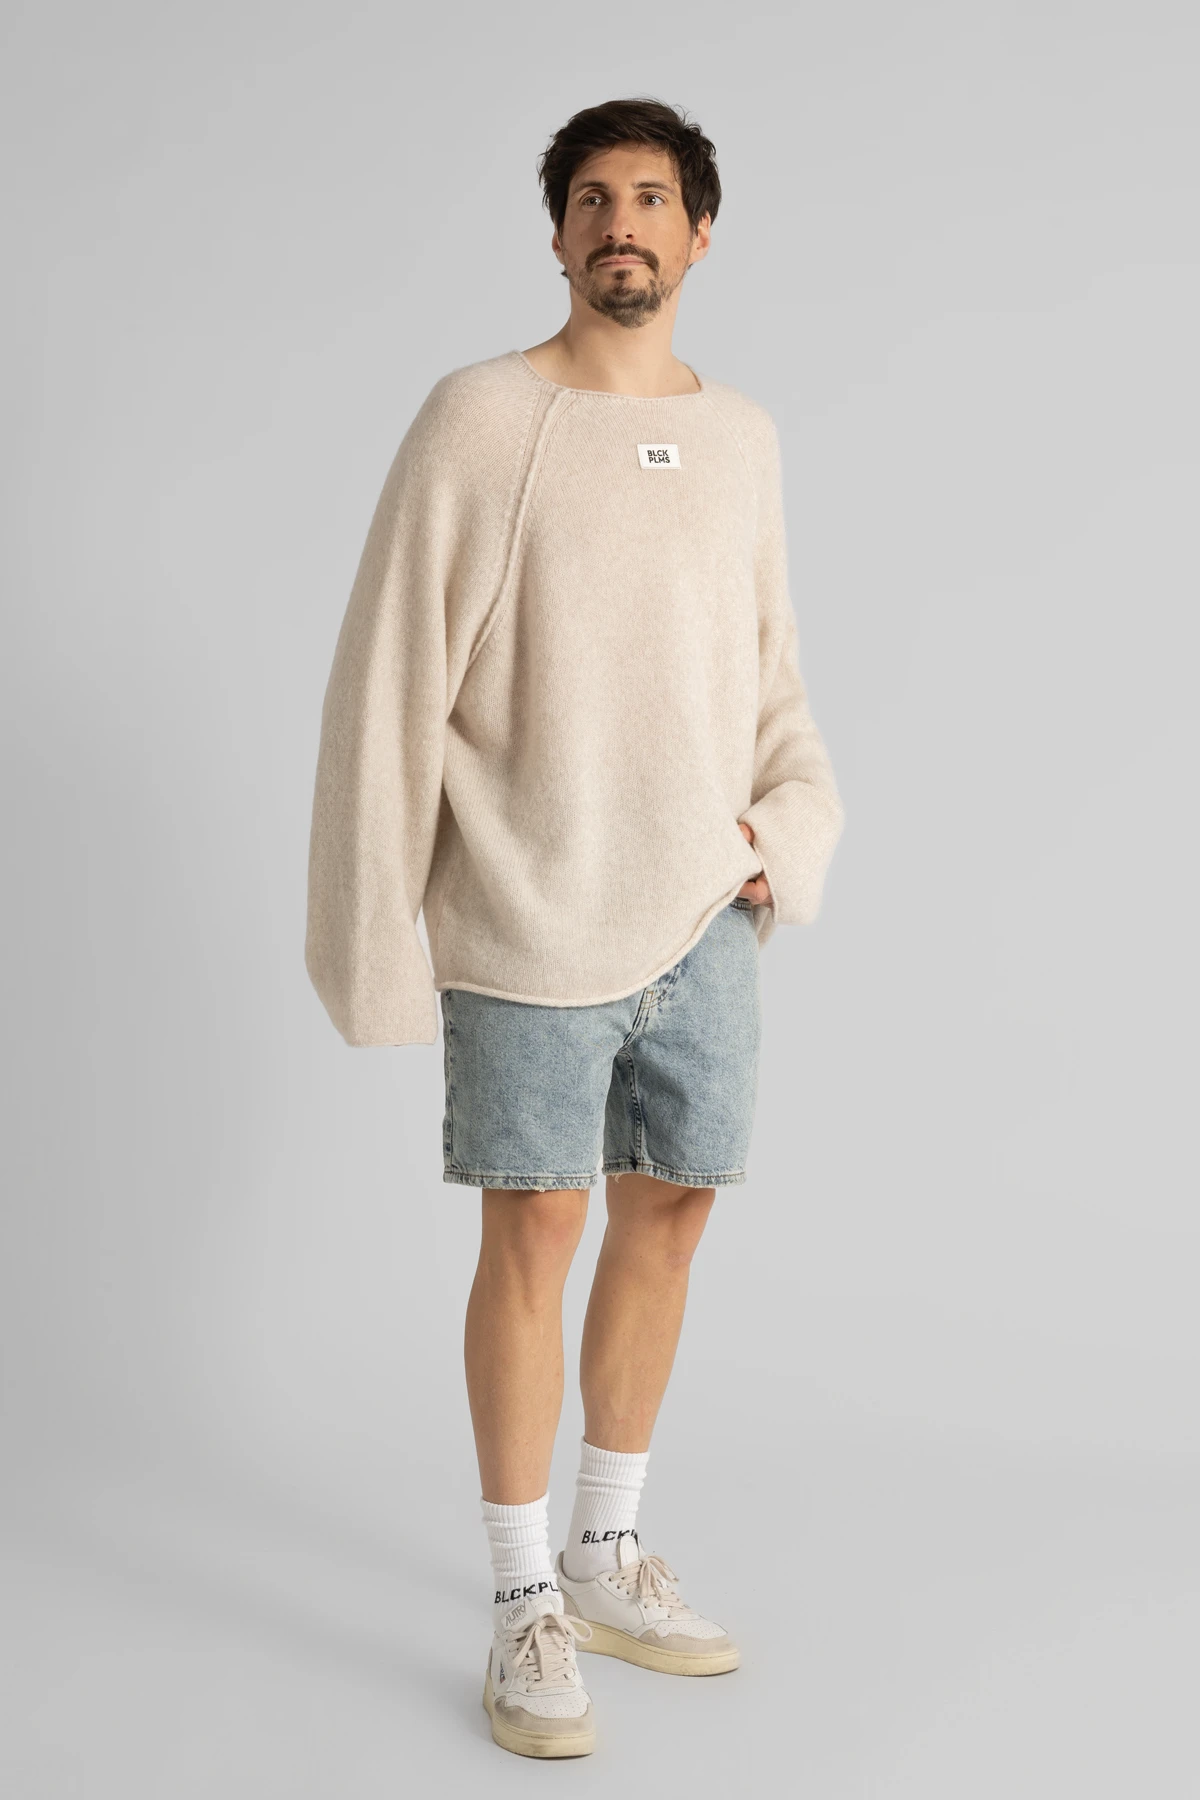 MAEXIN Sweater Oatmeal